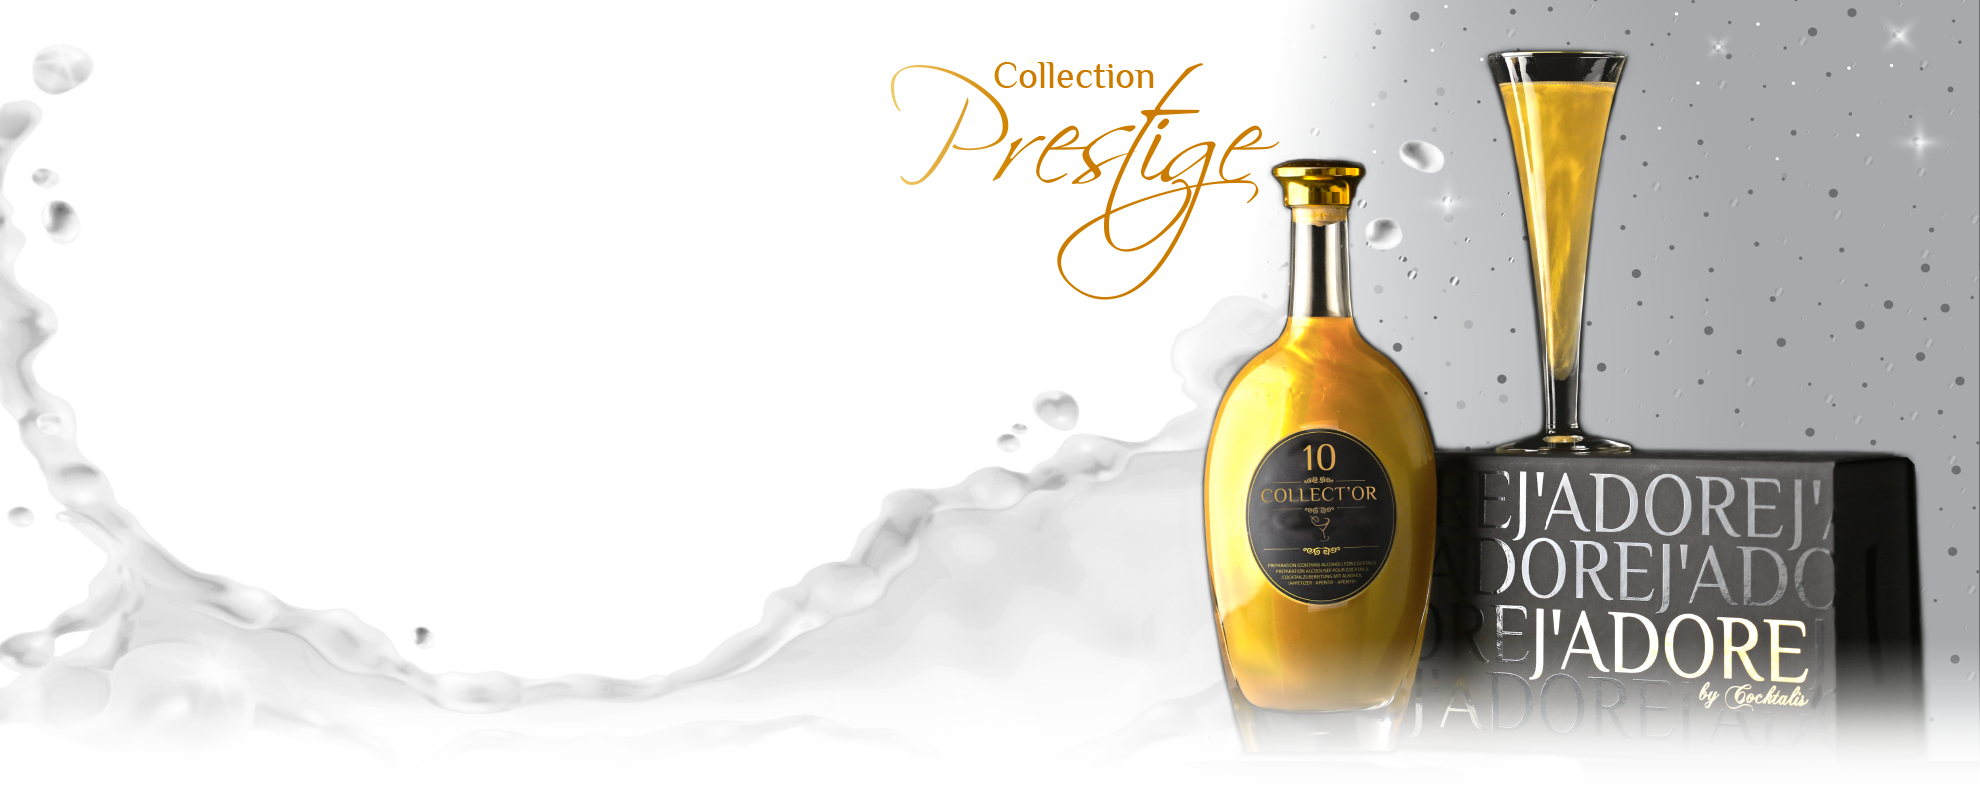 The prestige collection